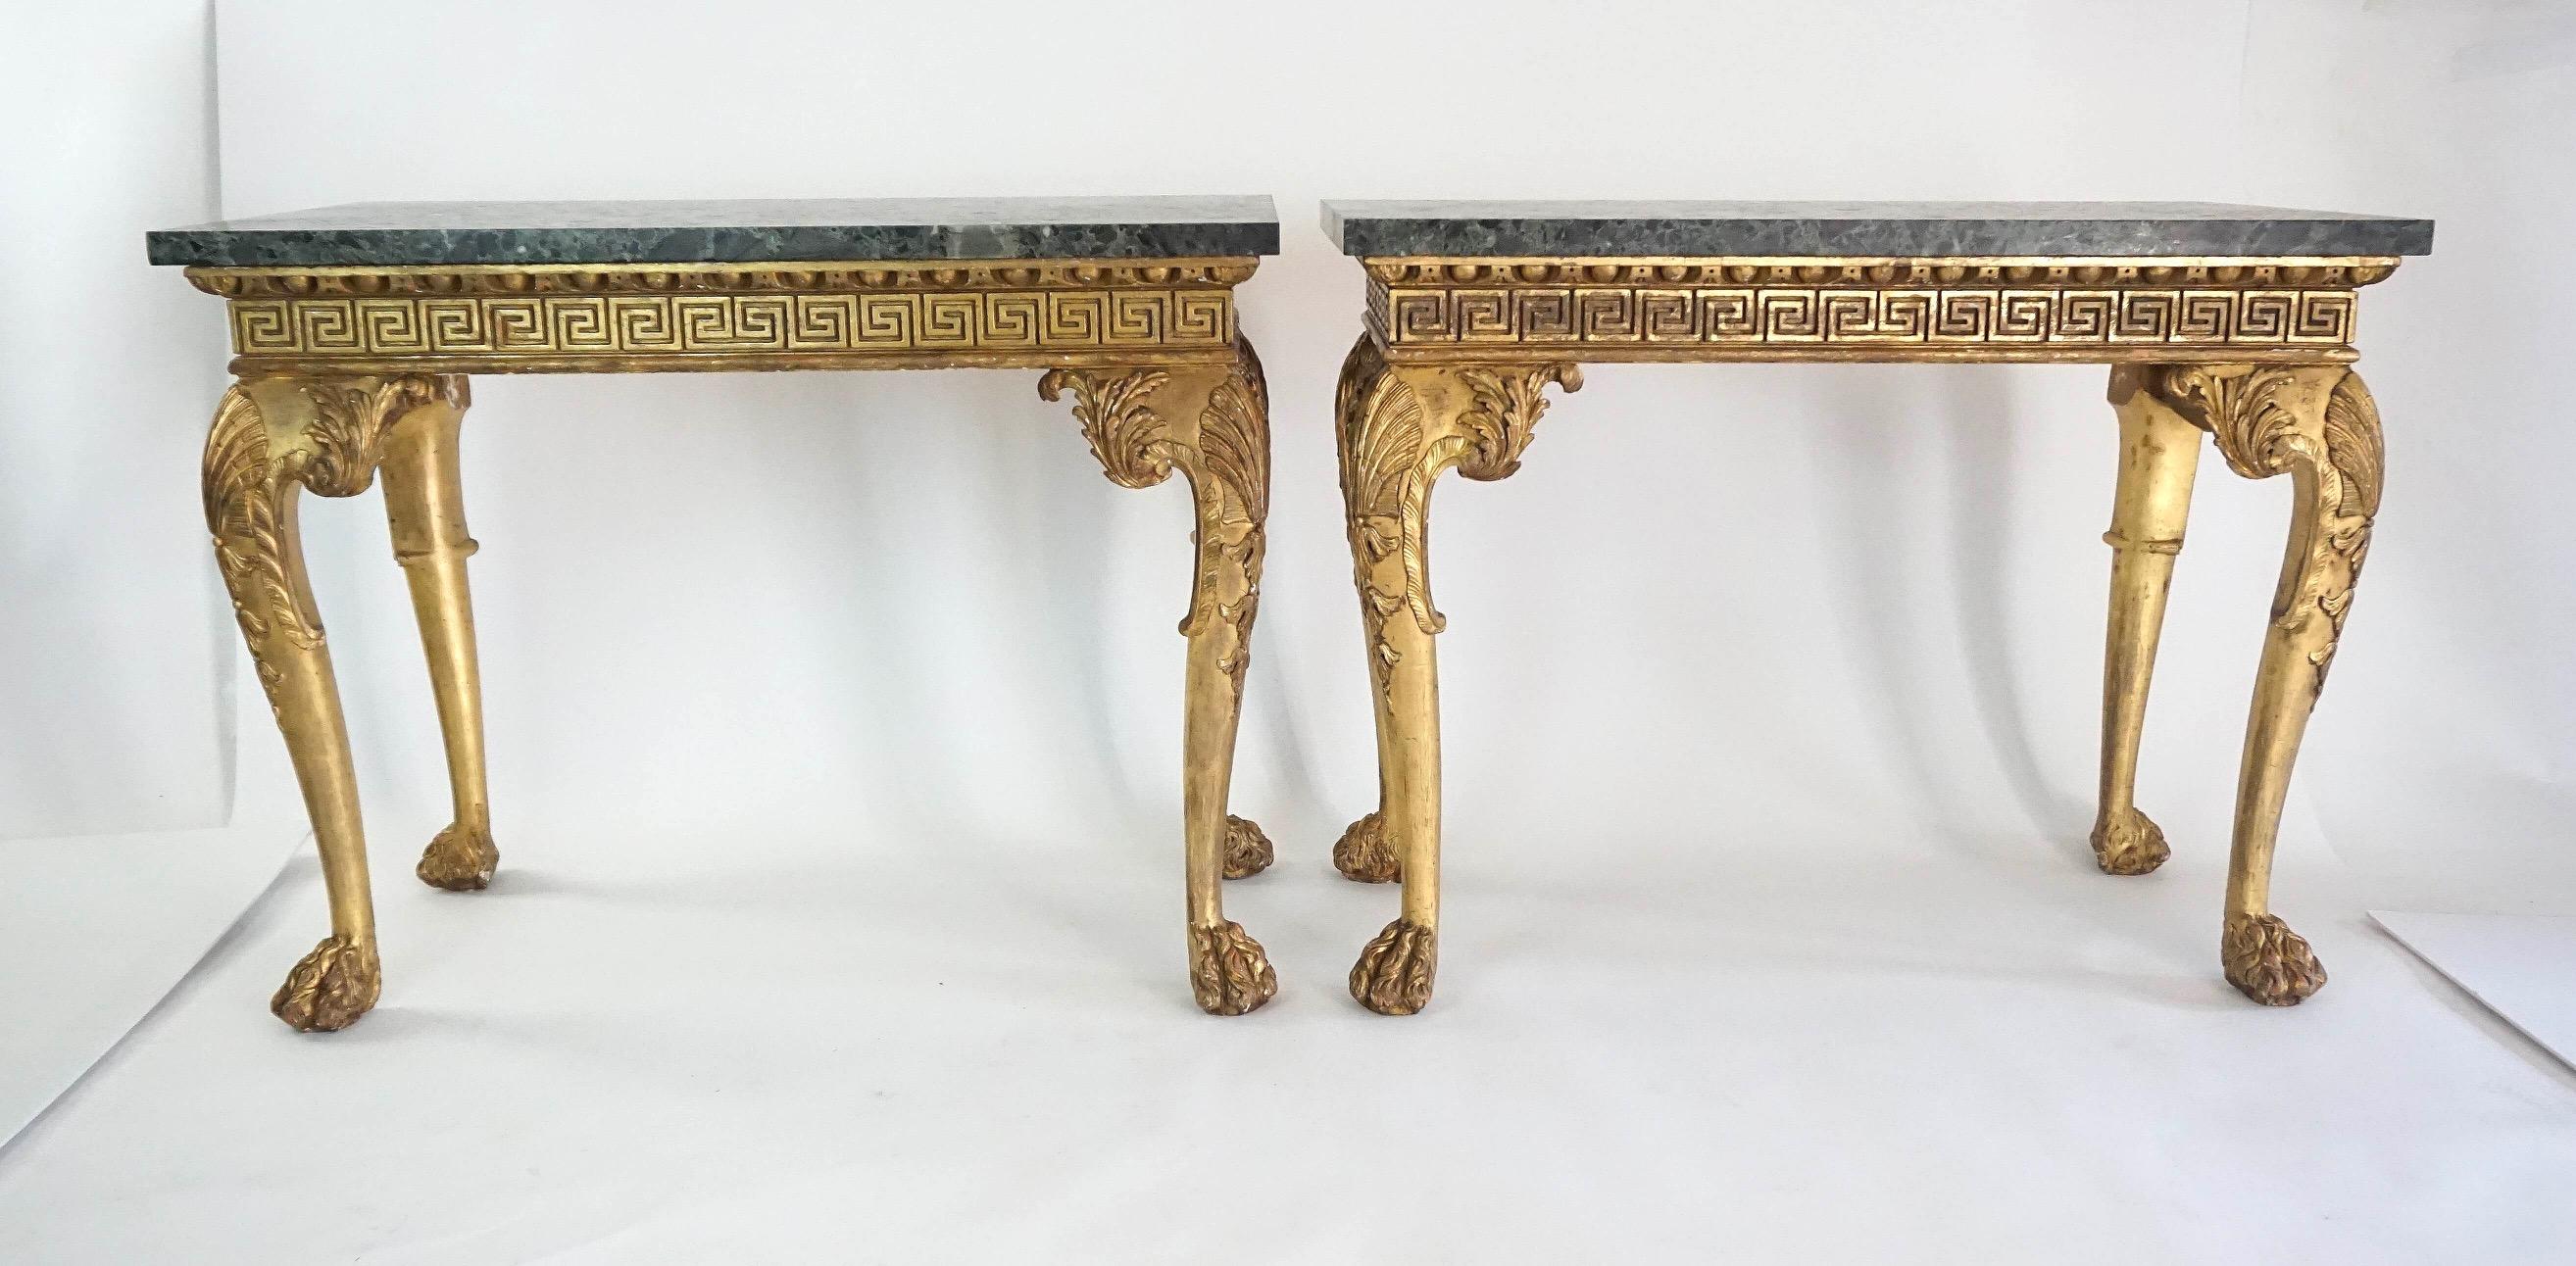 Anglo-Irish Regency Giltwood Side Tables, Manner of William Kent, circa 1815 For Sale 9